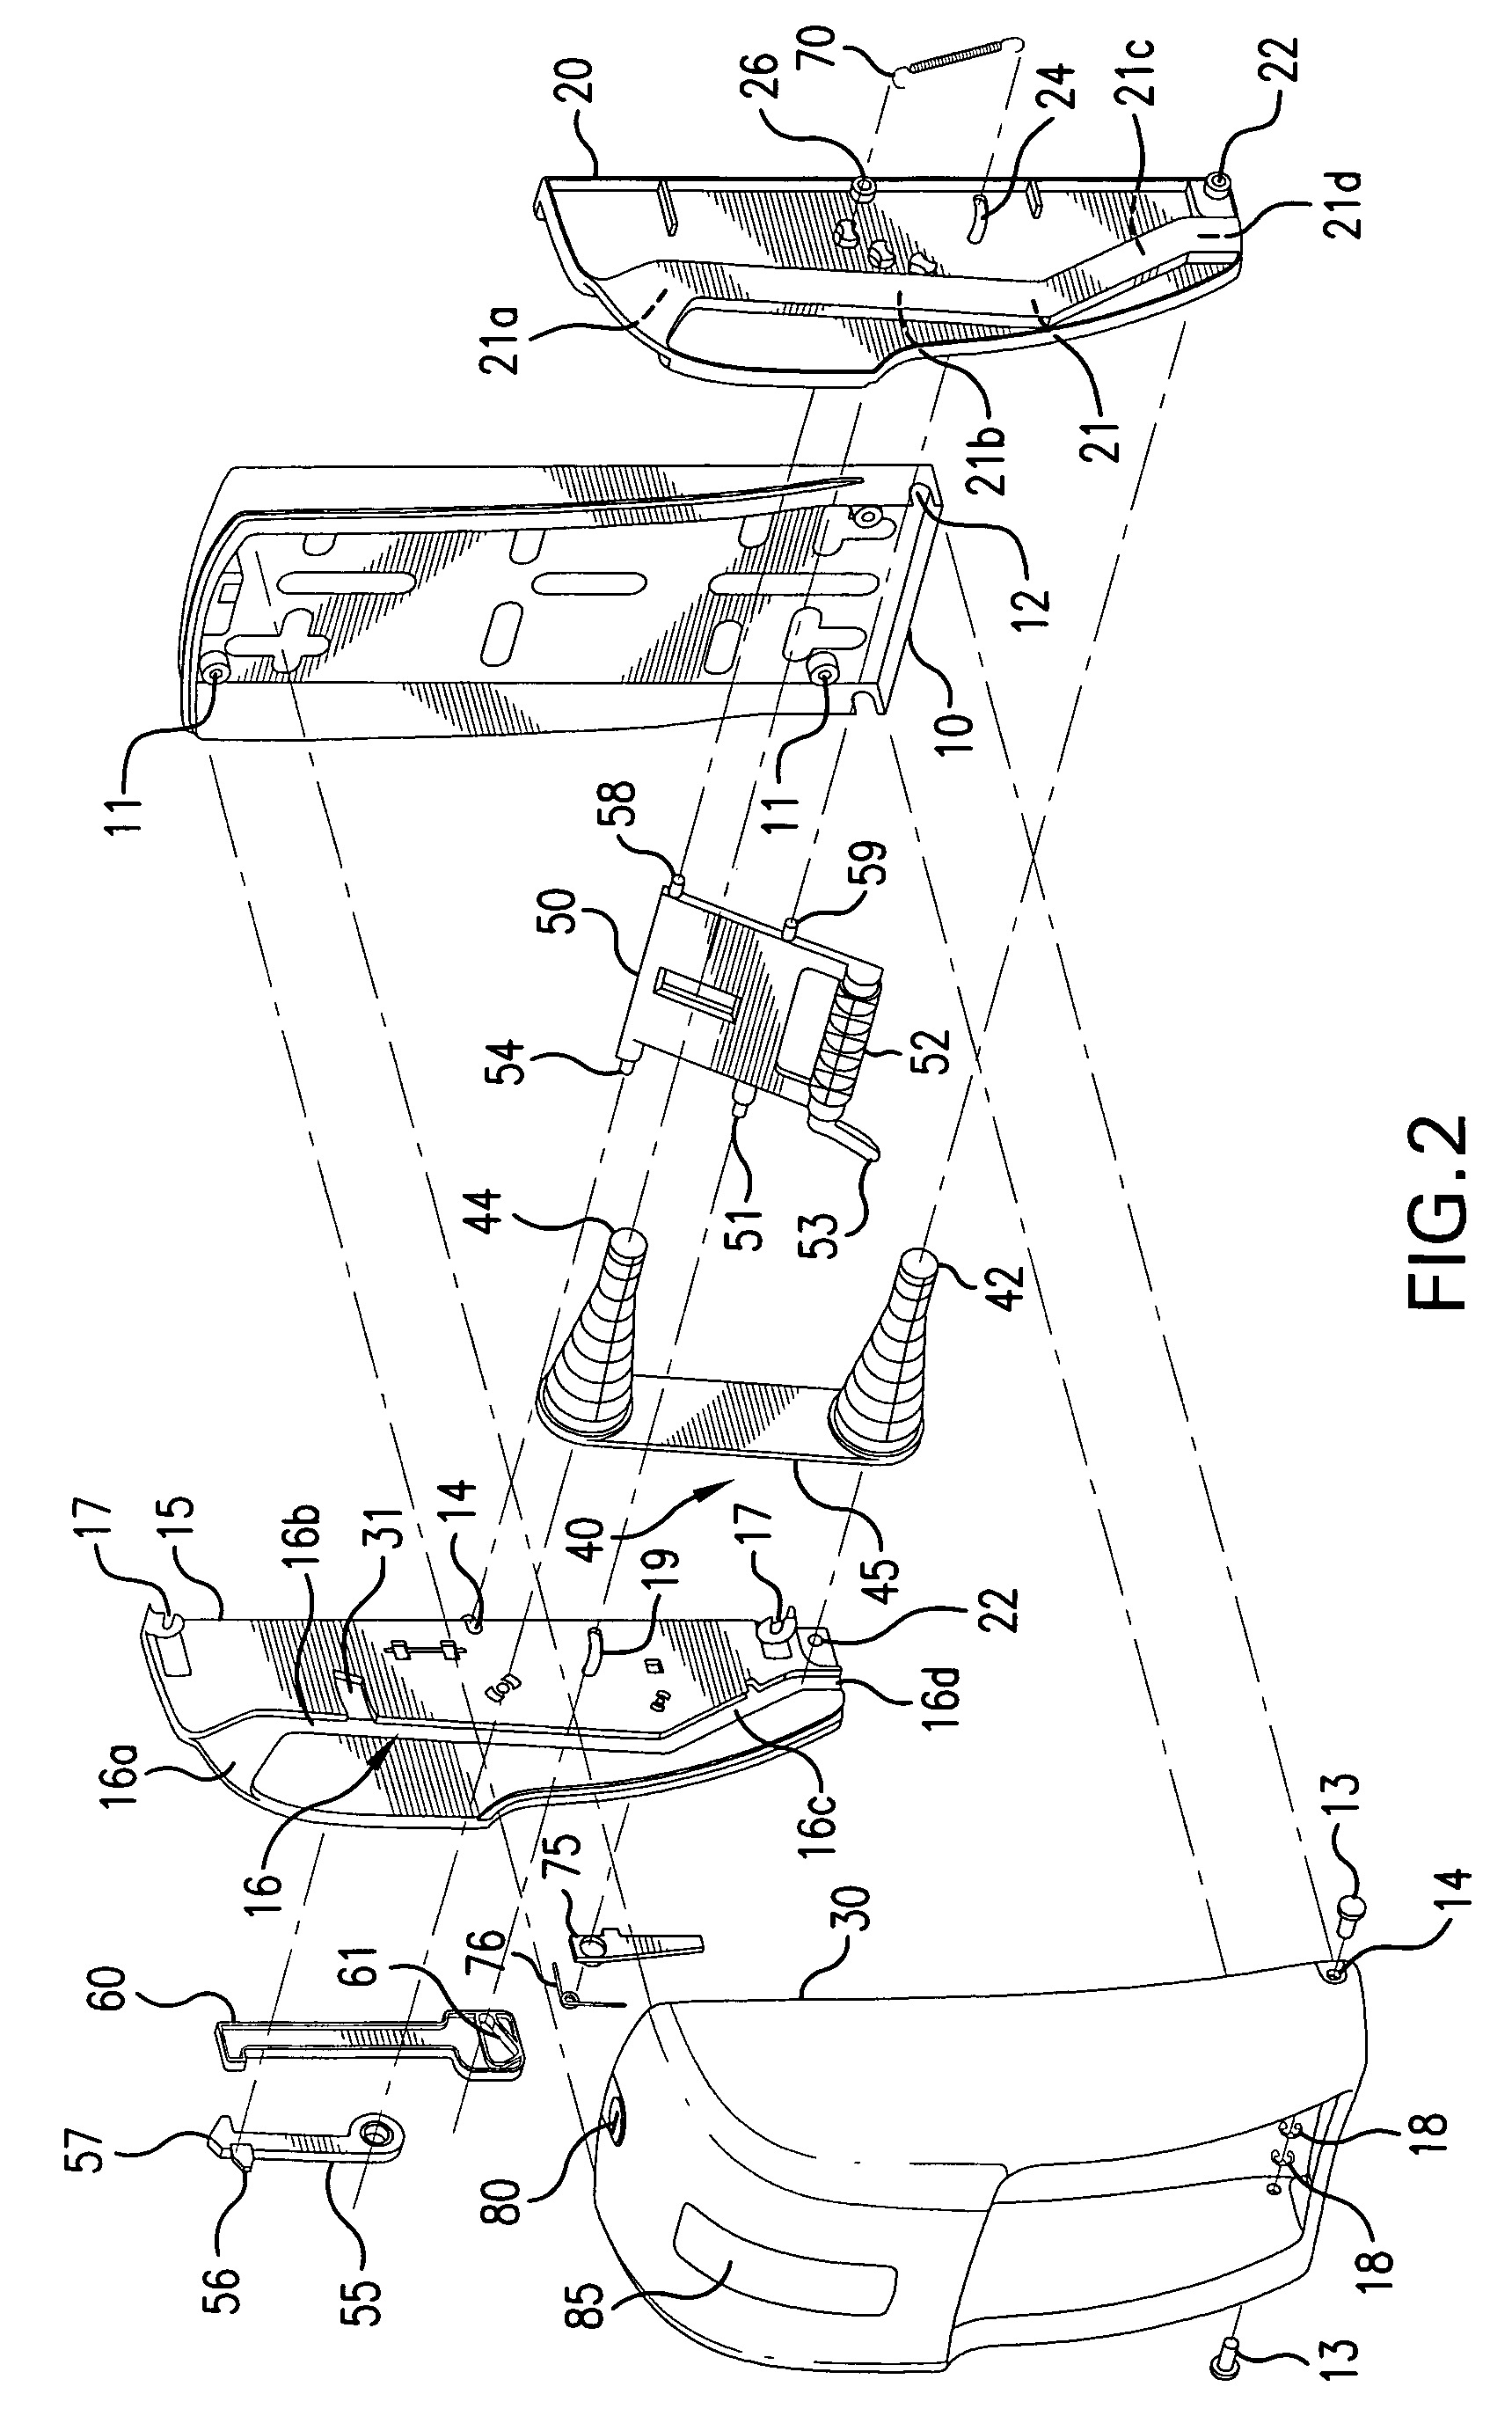 Dispenser that automatically transfers rolls of absorbent material, method of reloading same, and rolls of absorbent material for use in same